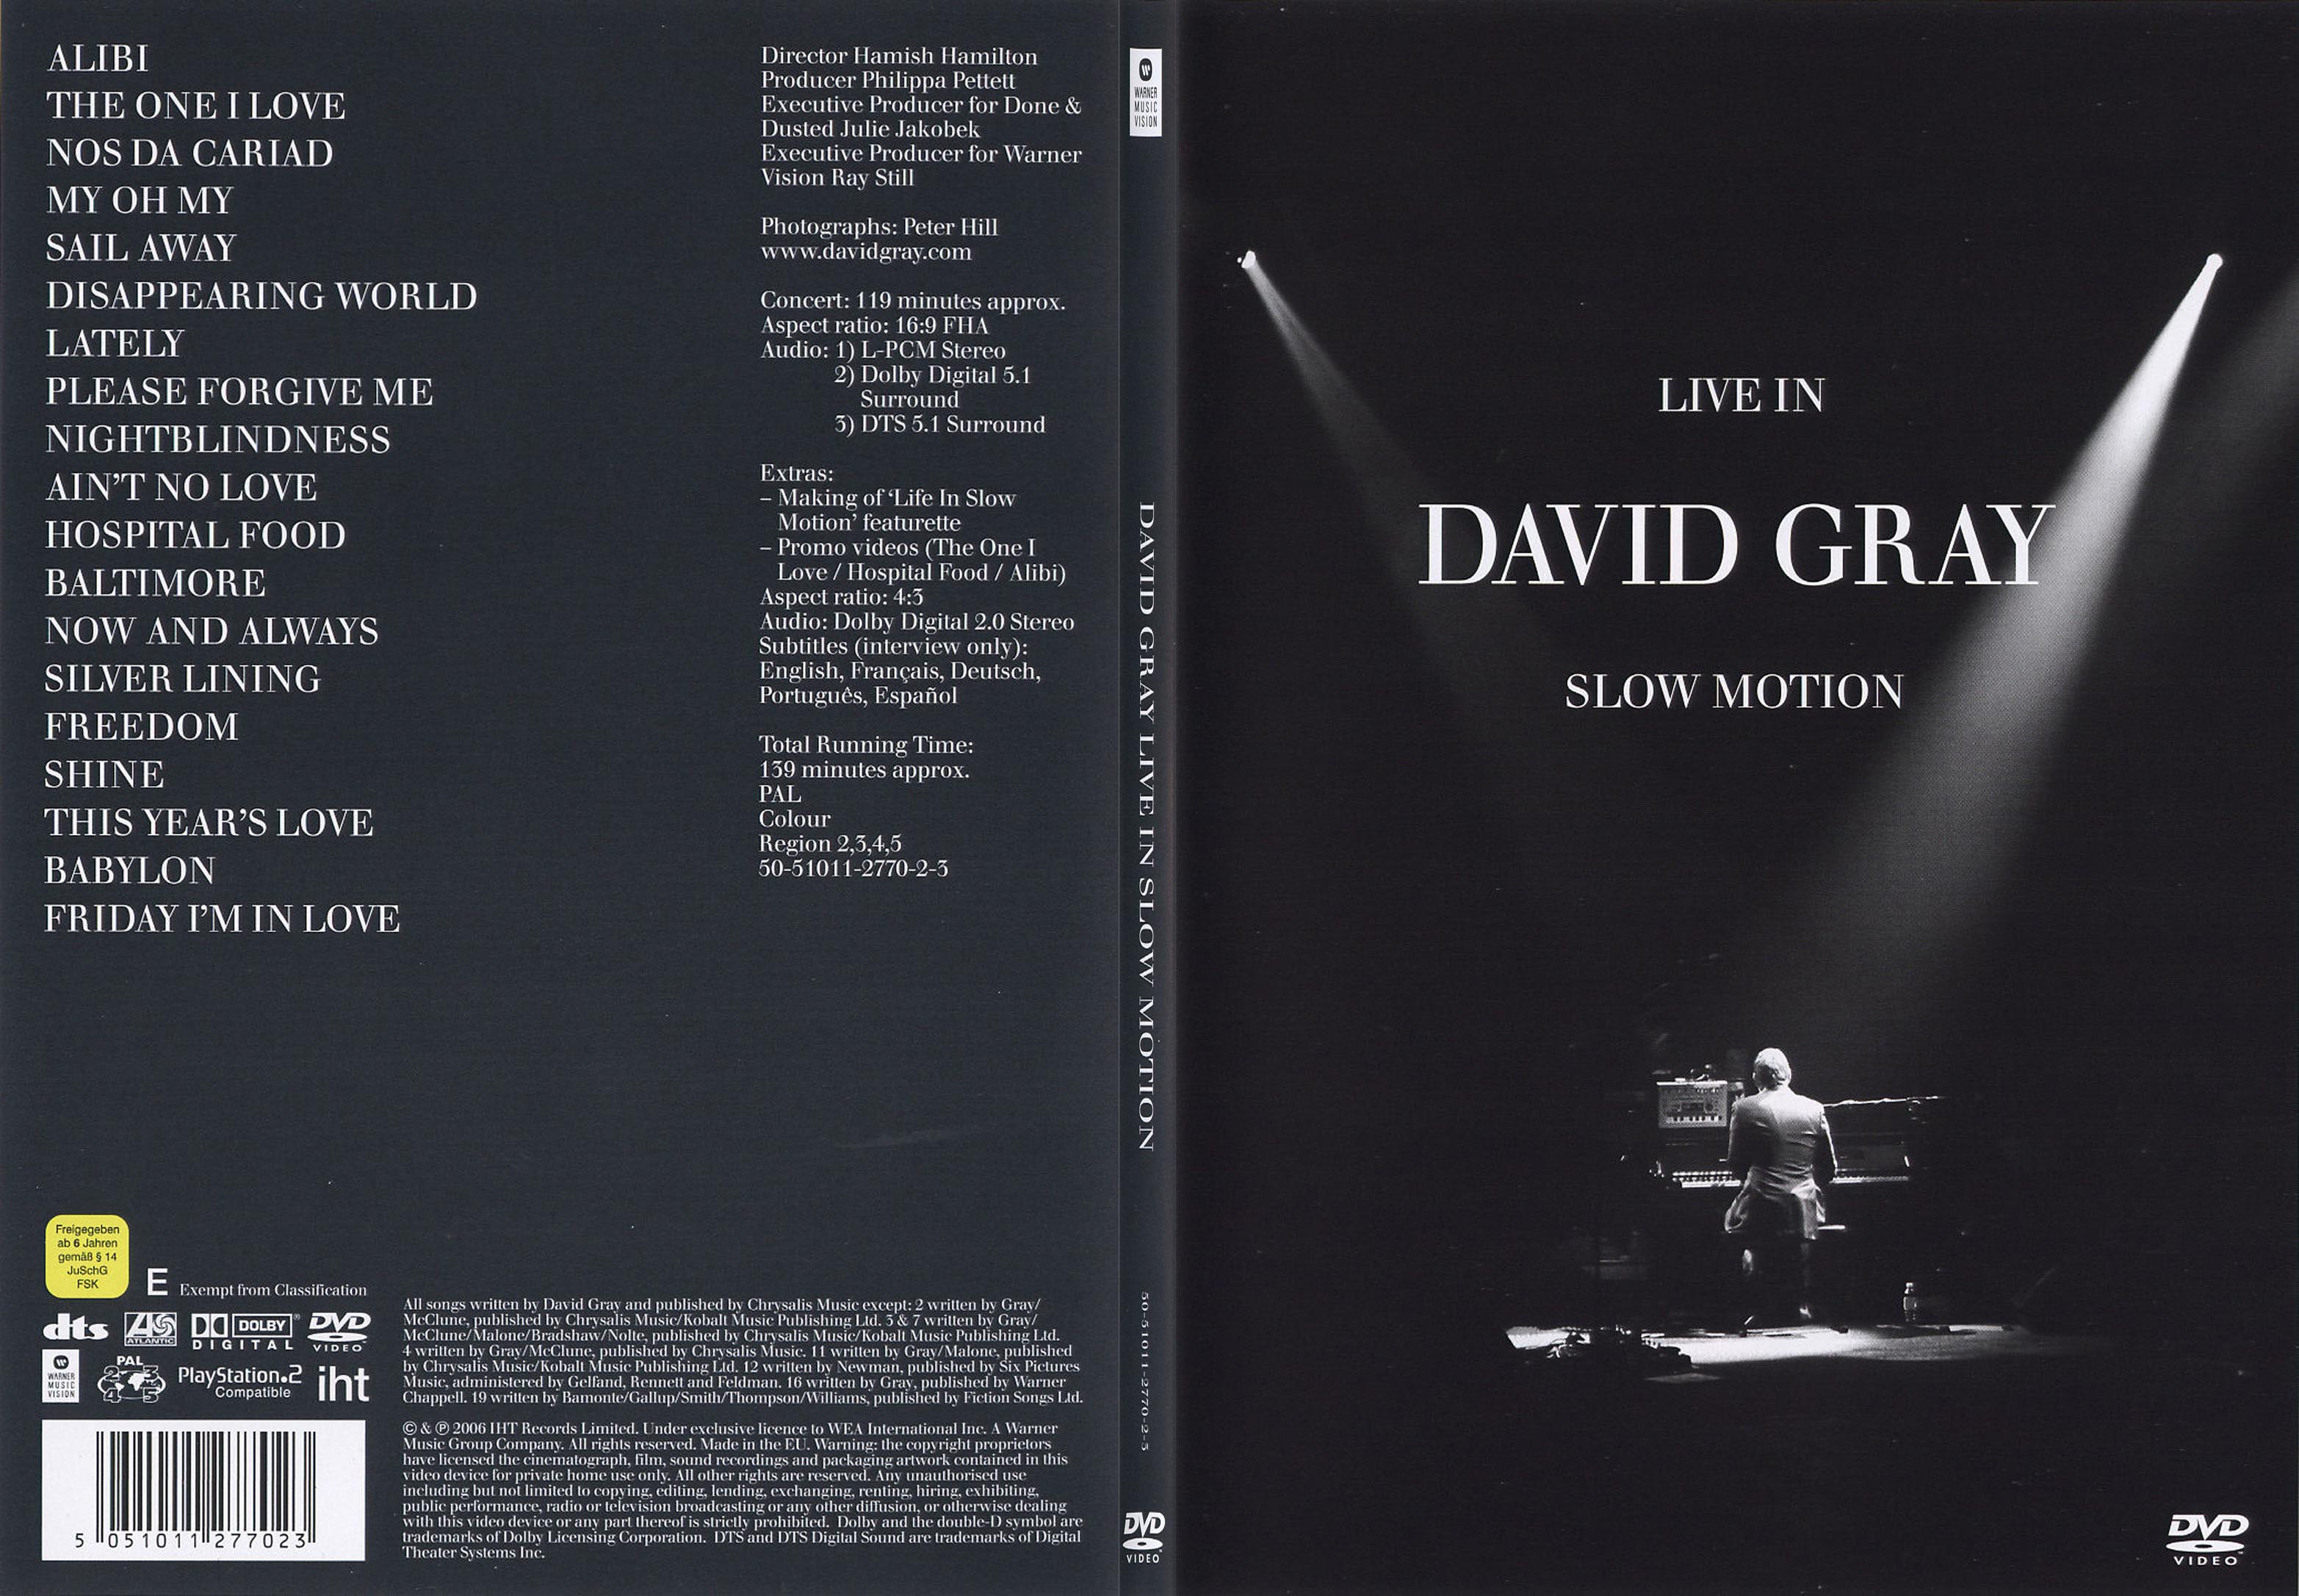 Jaquette DVD David Gray live in slow motion - SLIM